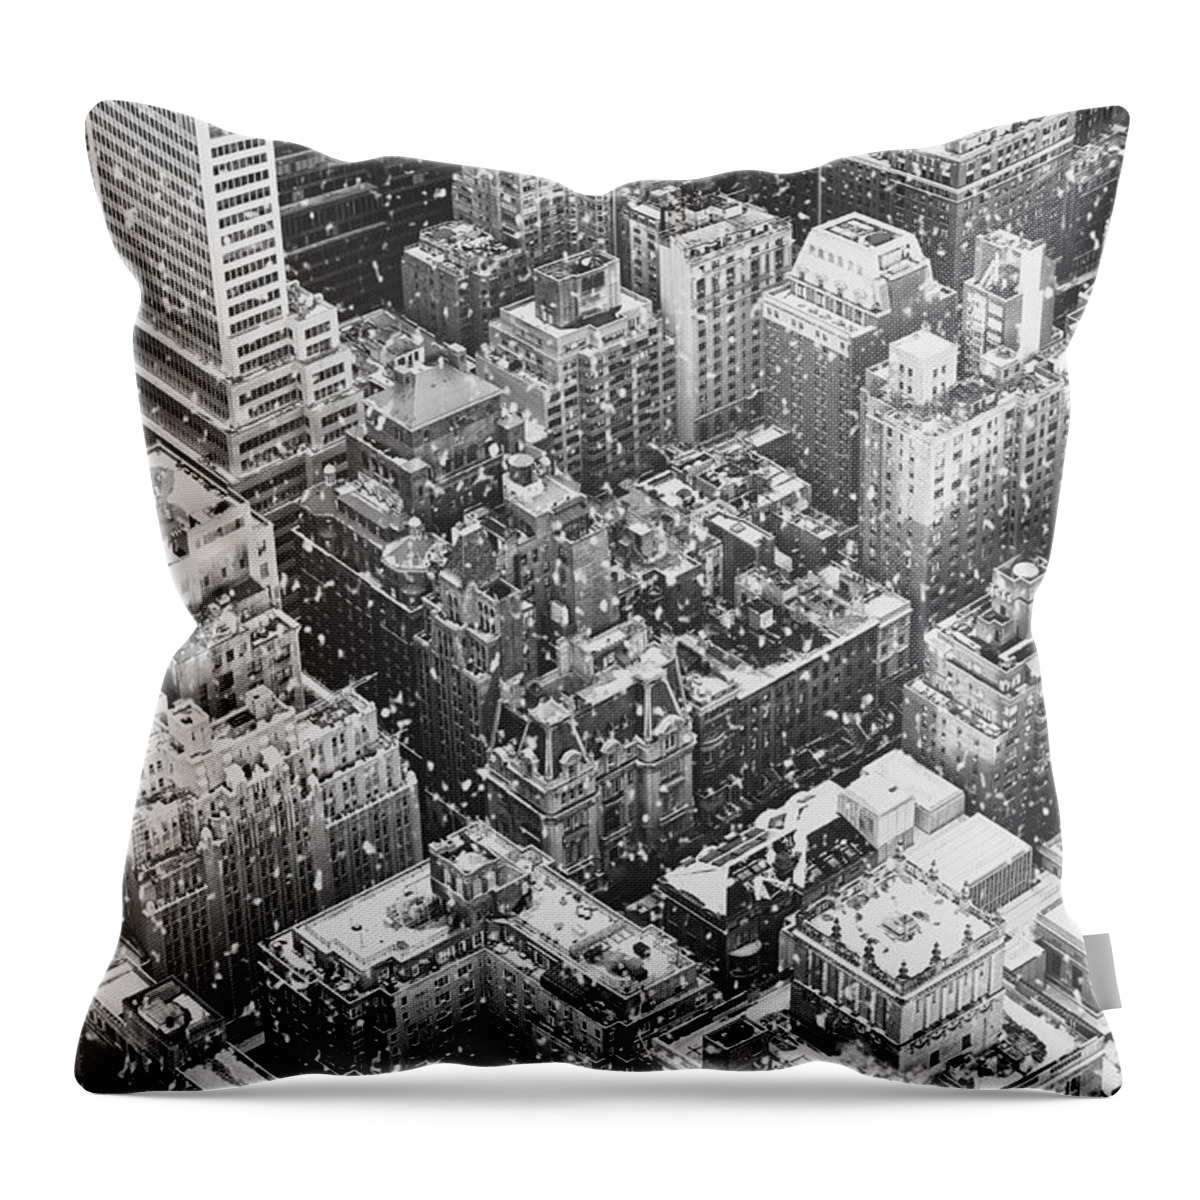 Nyc Throw Pillow featuring the photograph New York City - Skyline In the Snow by Vivienne Gucwa